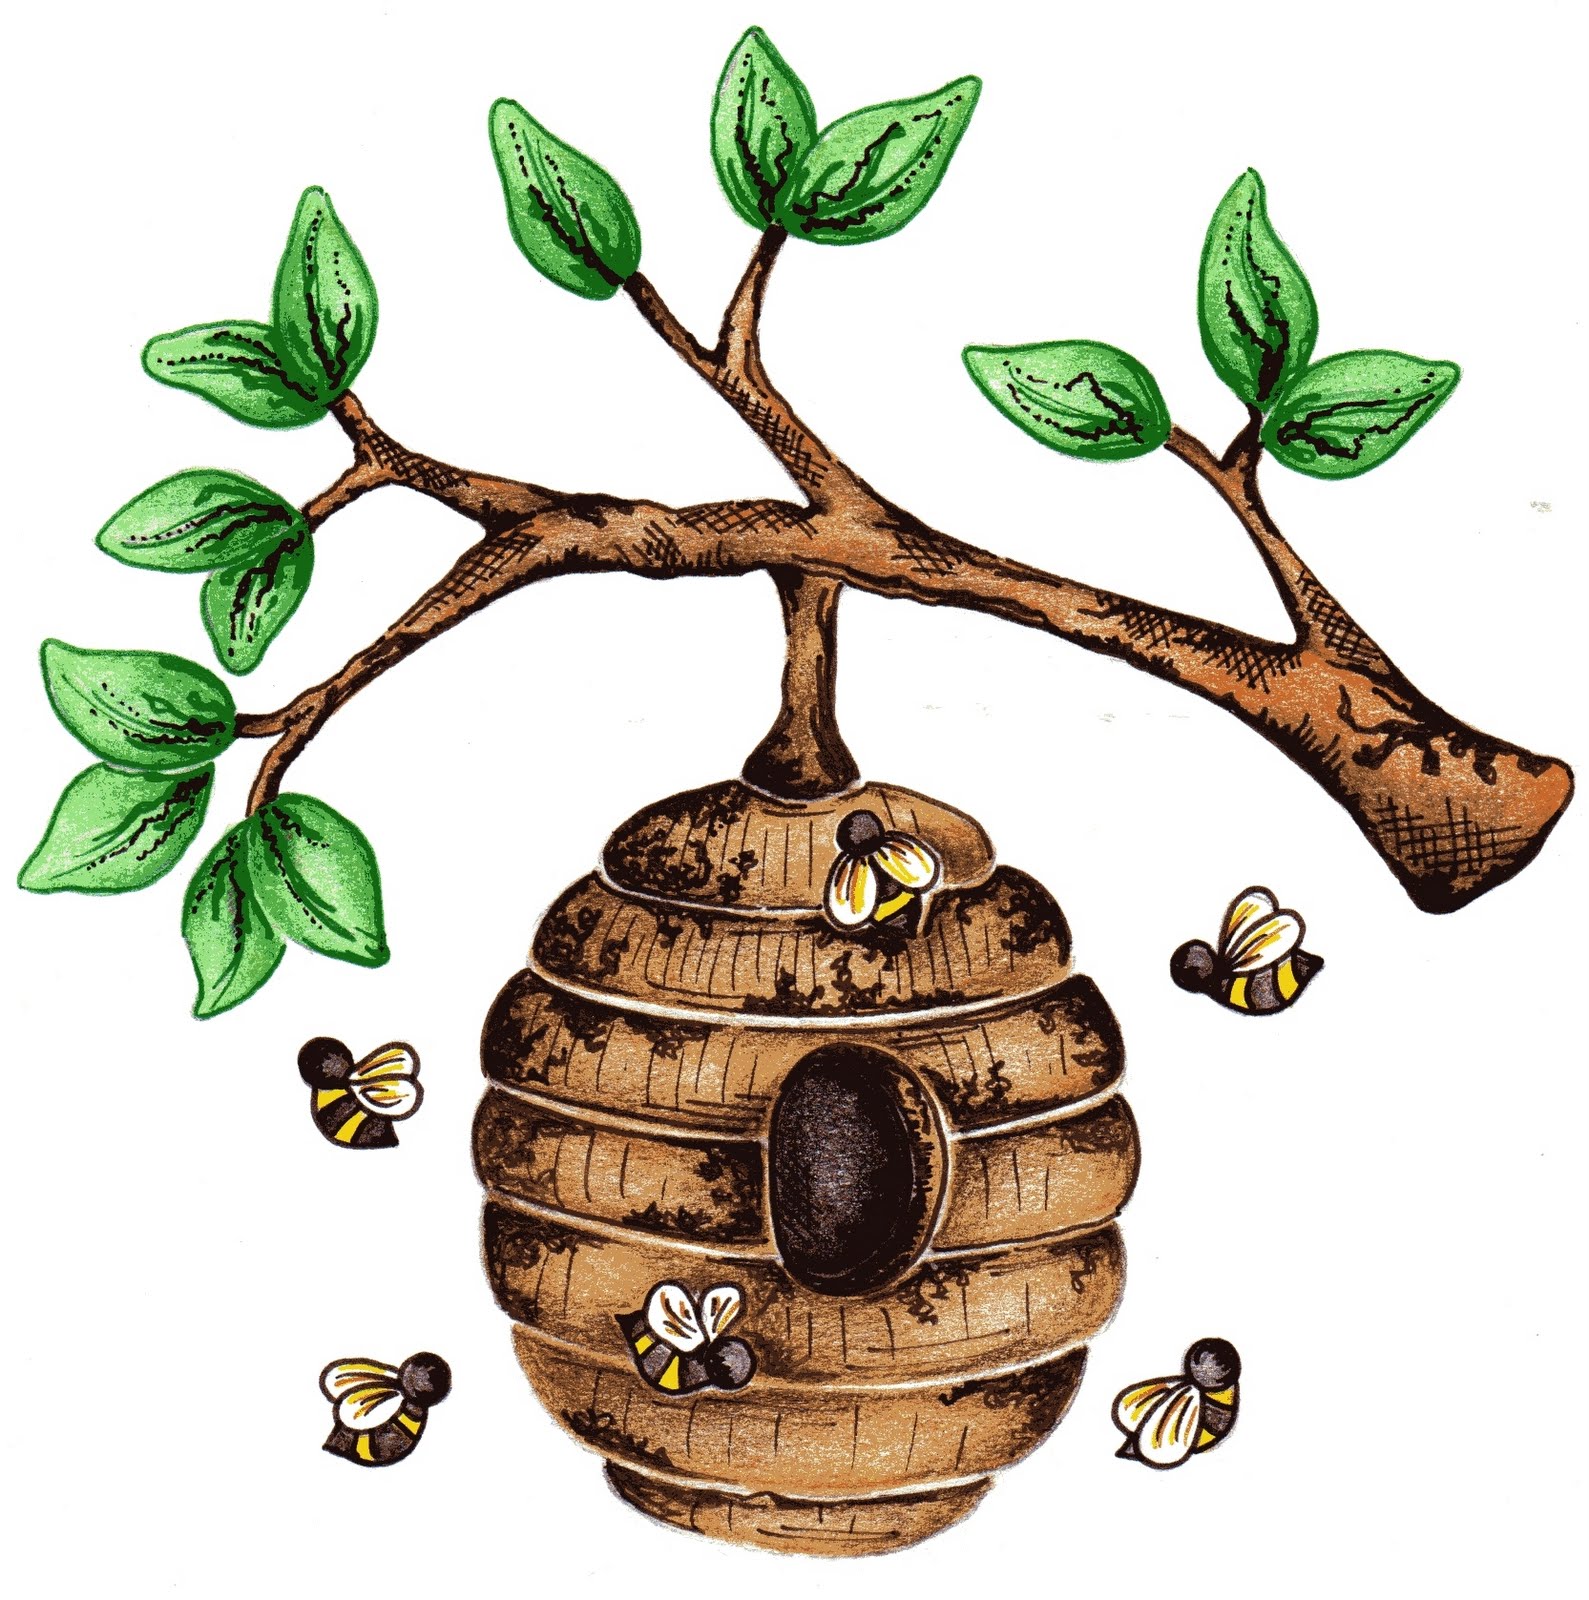 Free Bee Hive Images, Download Free Bee Hive Images png images, Free